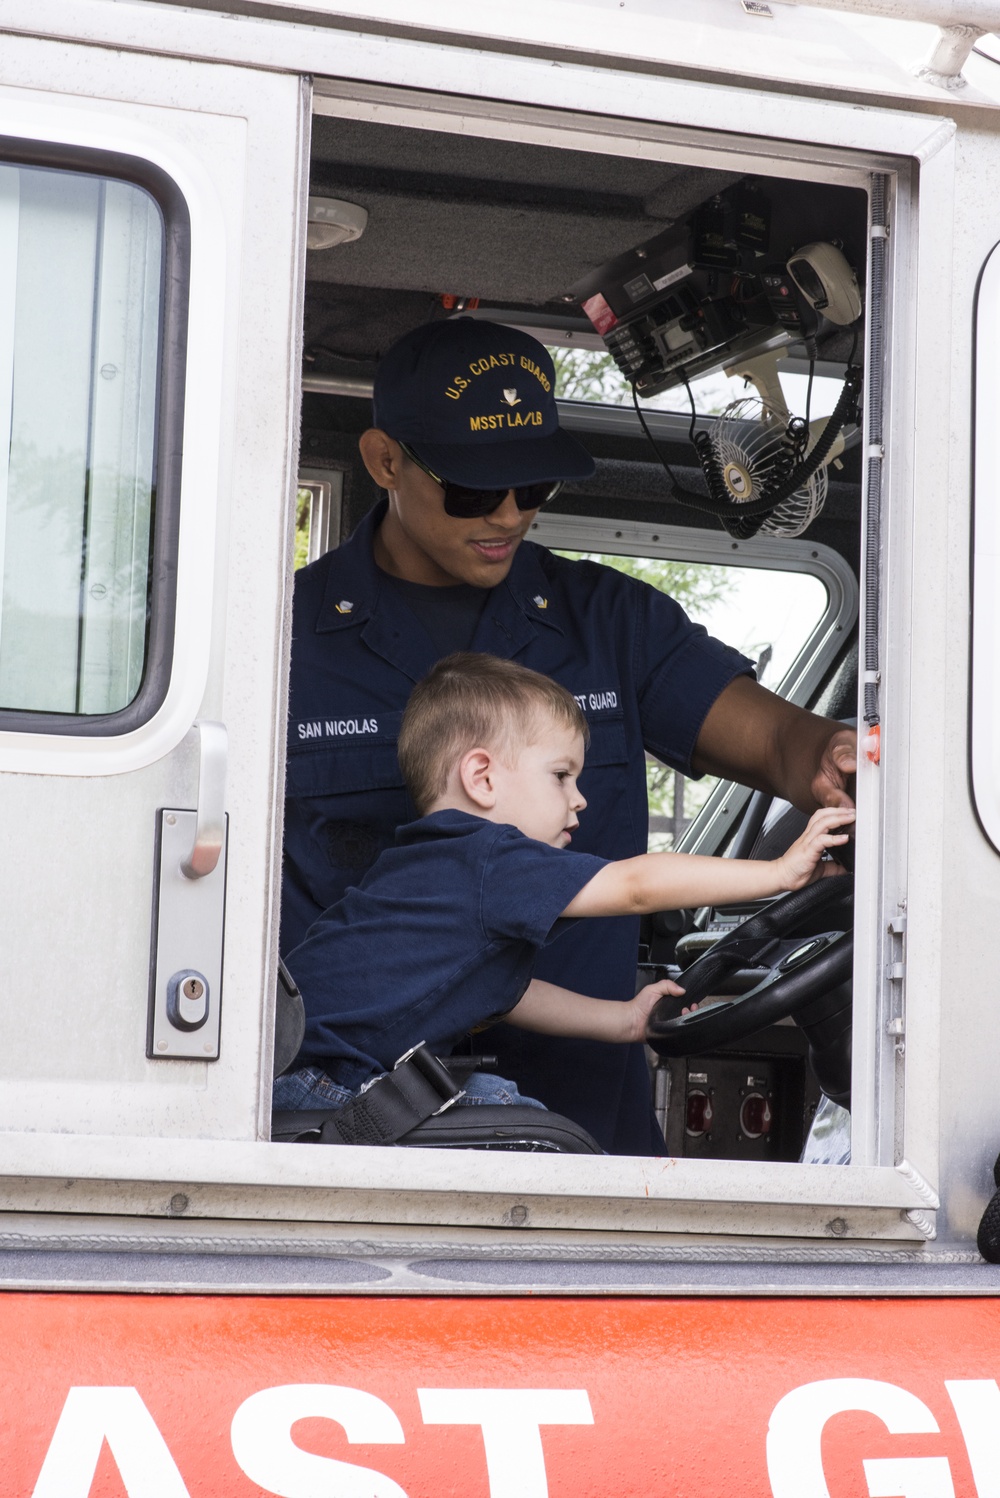 Coast Guard participates in DHS Family Day